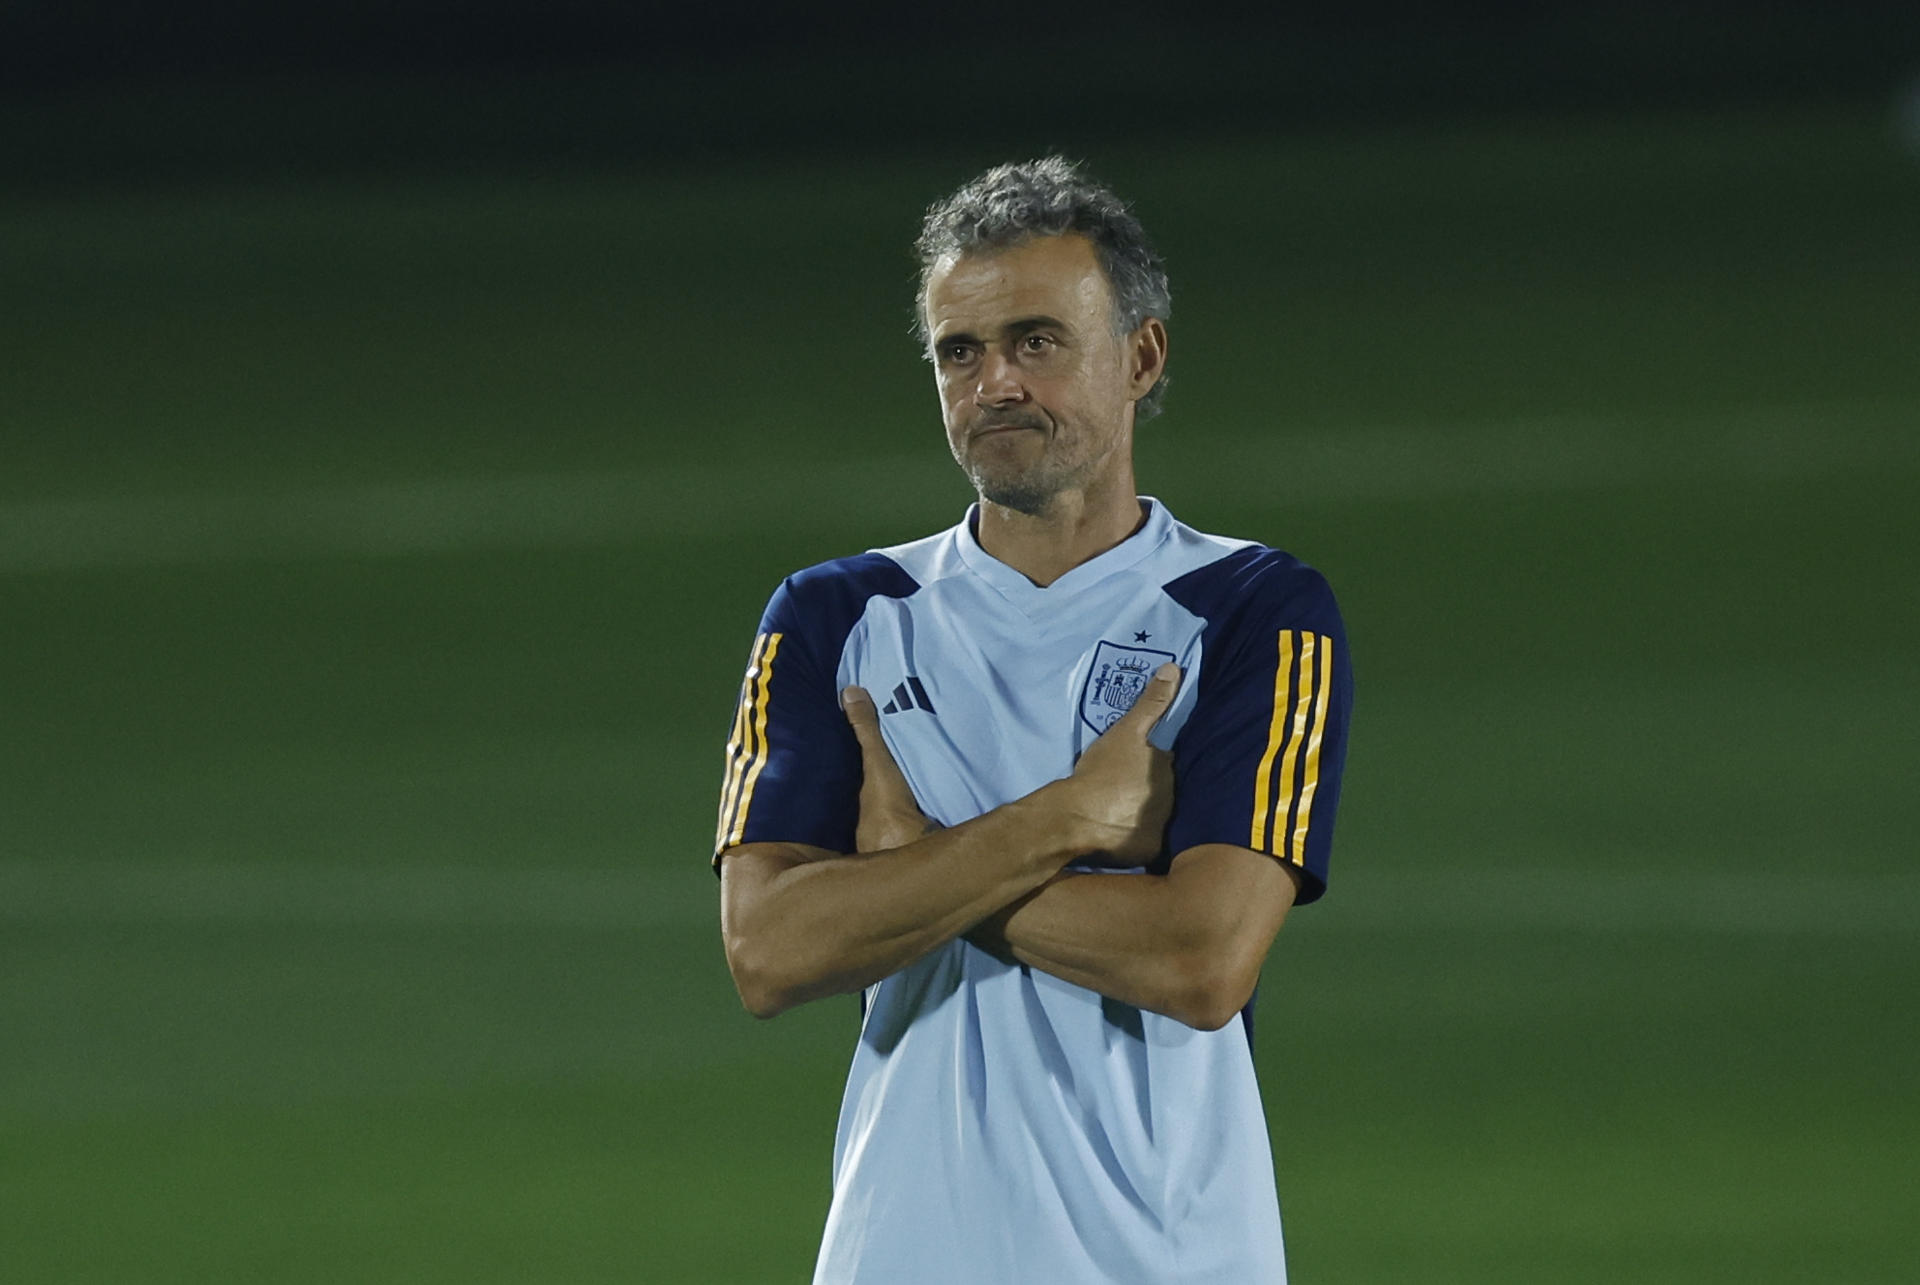 Prepared for anything: Luis Enrique asked his players to kick about 1,000 penalties